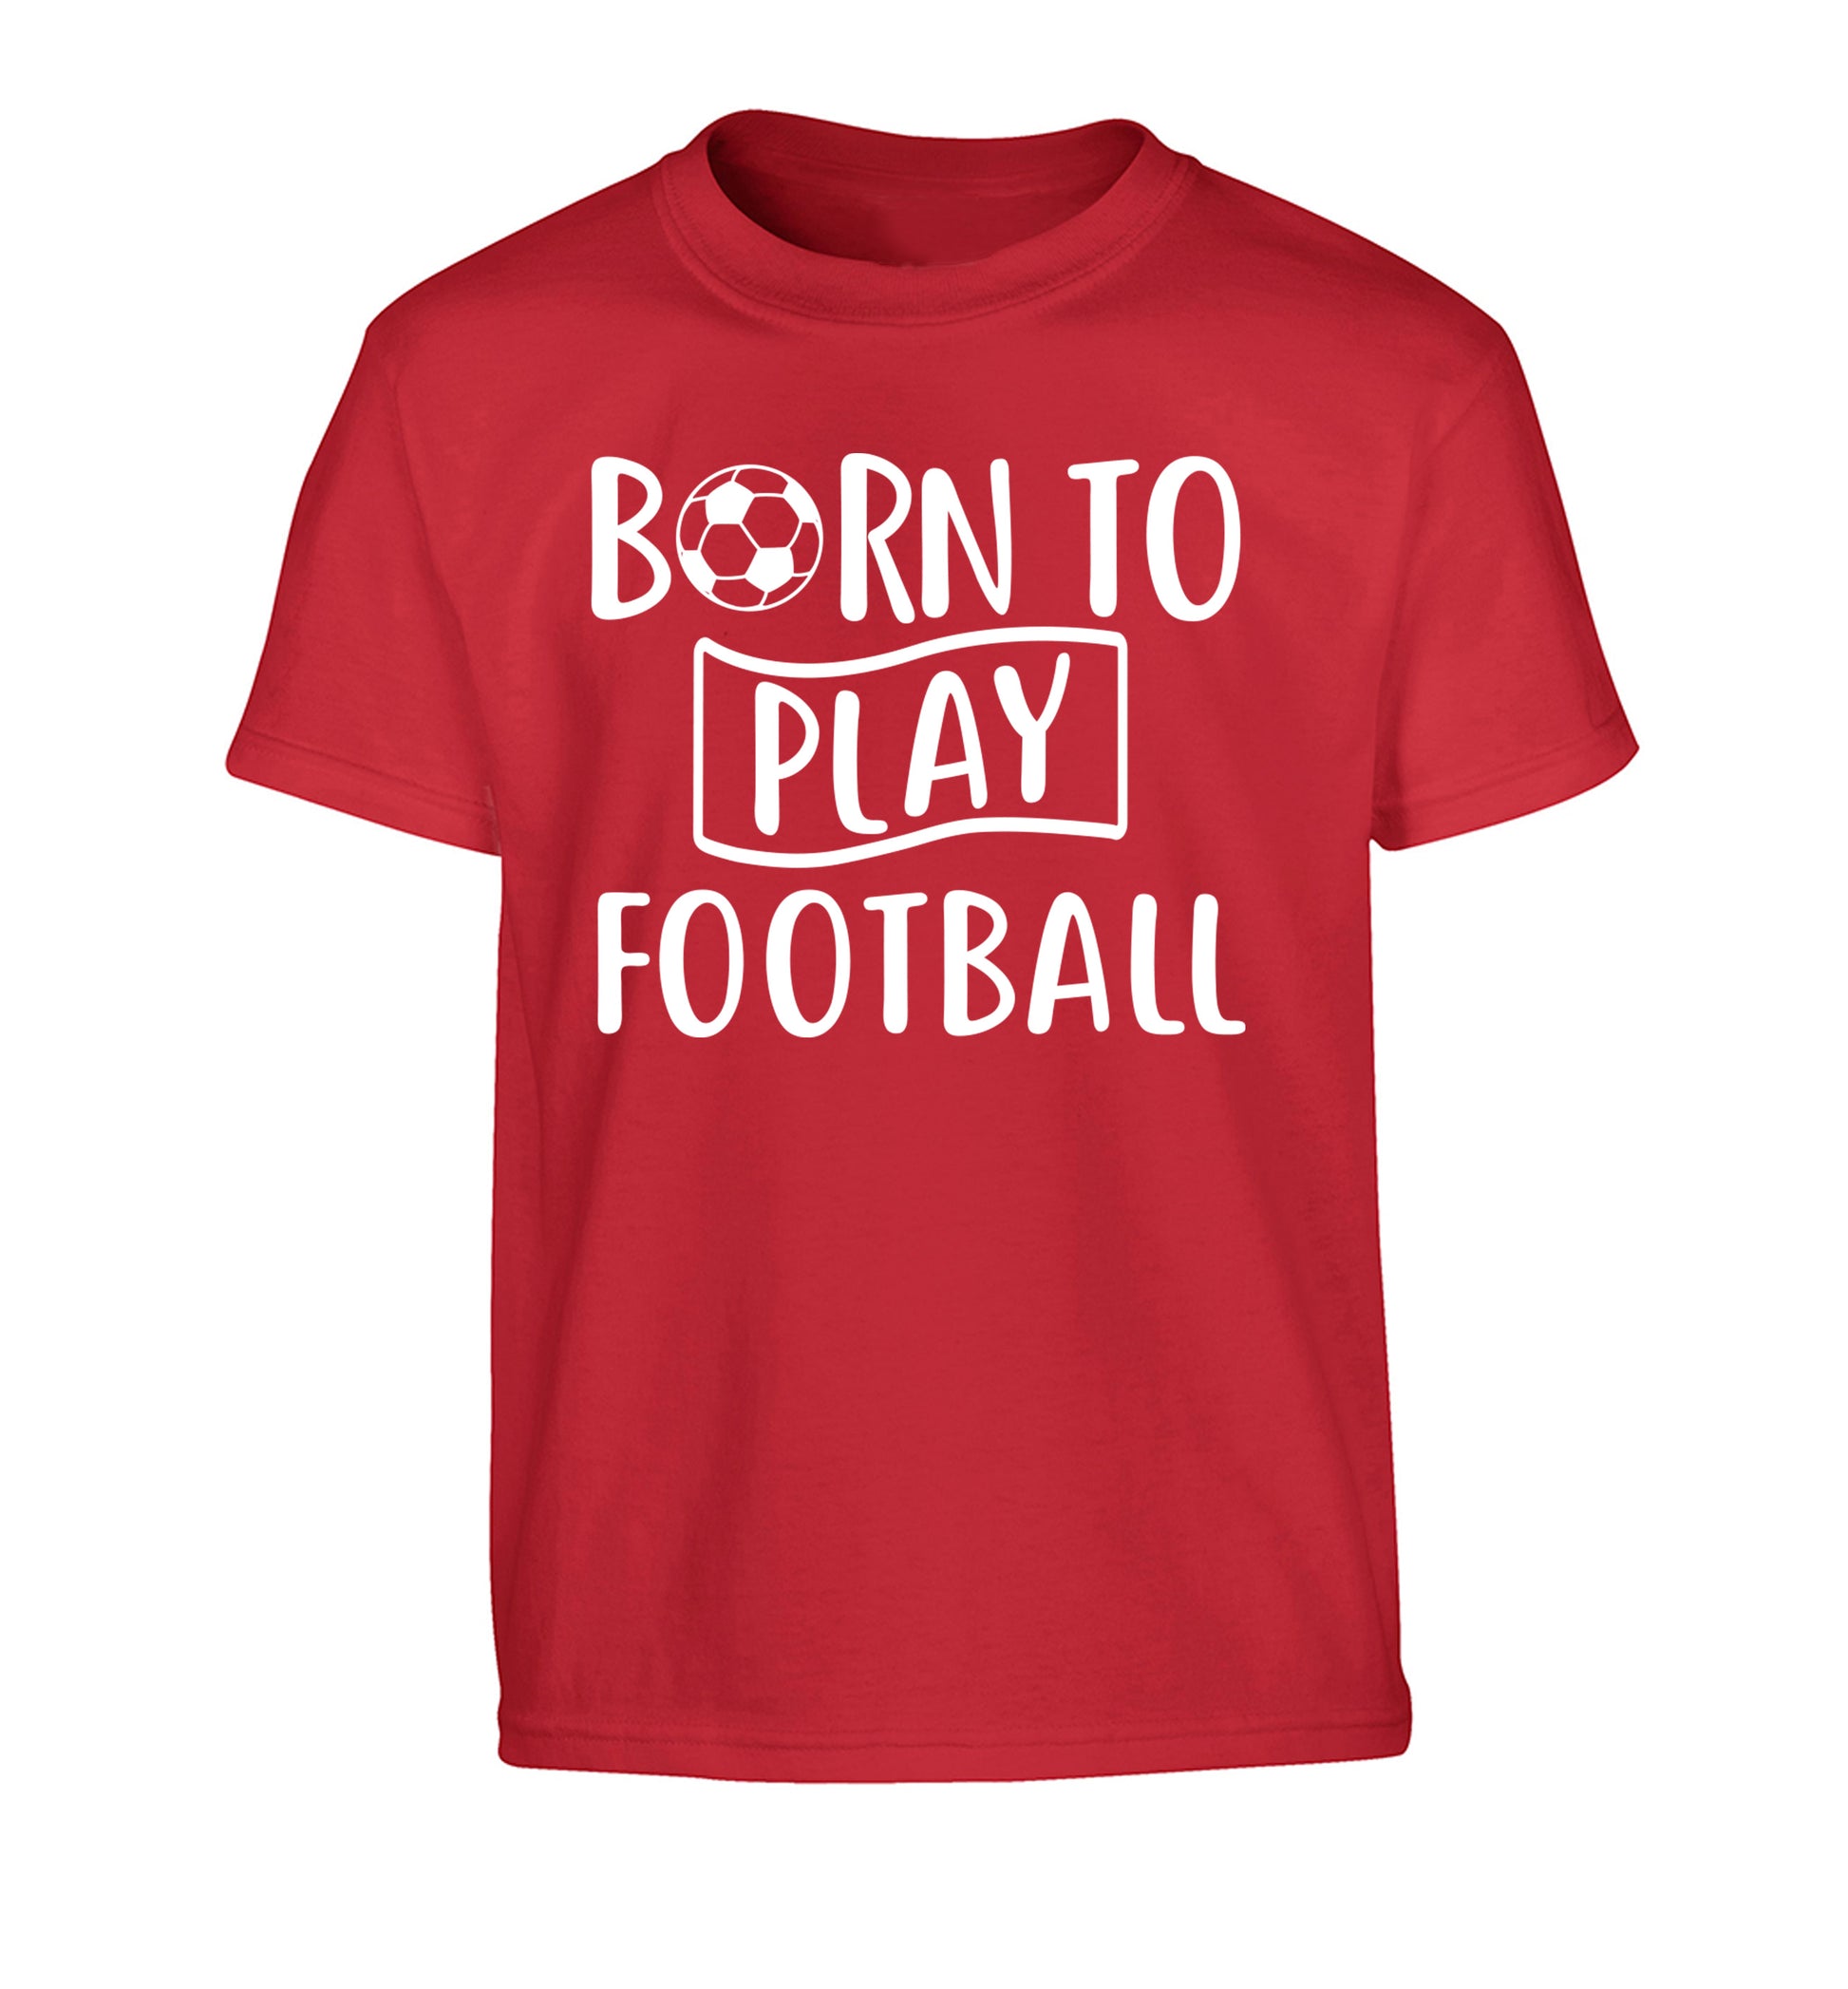 Born to play football Children's red Tshirt 12-14 Years